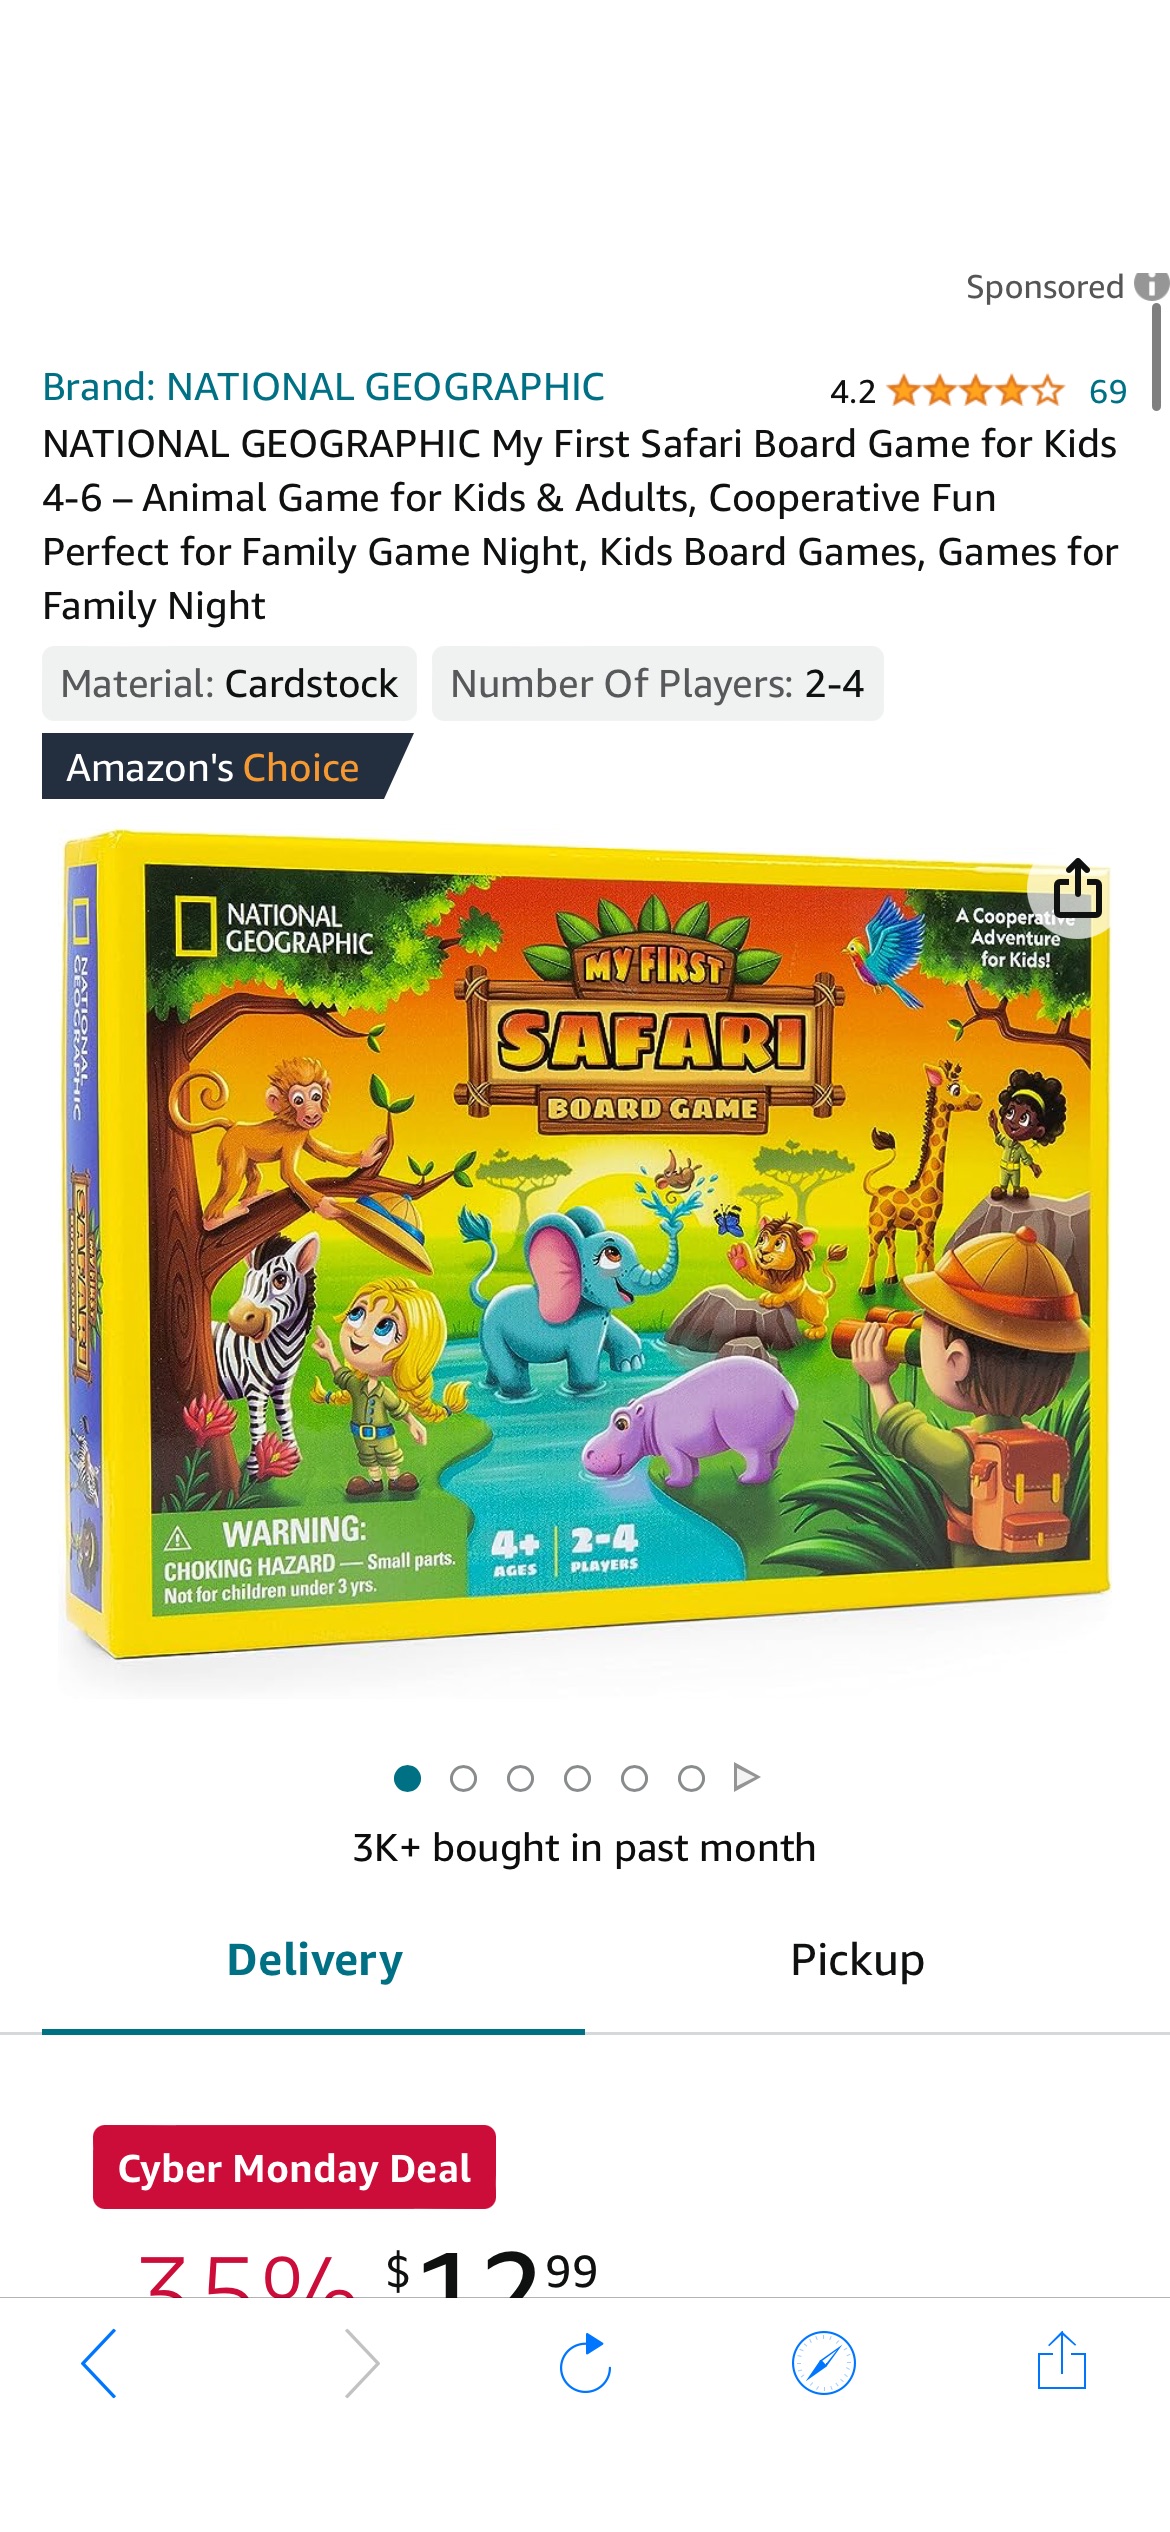 Amazon.com: NATIONAL GEOGRAPHIC My First Safari Board Game for Kids 4-6 – Animal Game for Kids & Adults, Cooperative Fun Perfect for Family Game Night, Kids Board Games, Games for Family Night : Natio